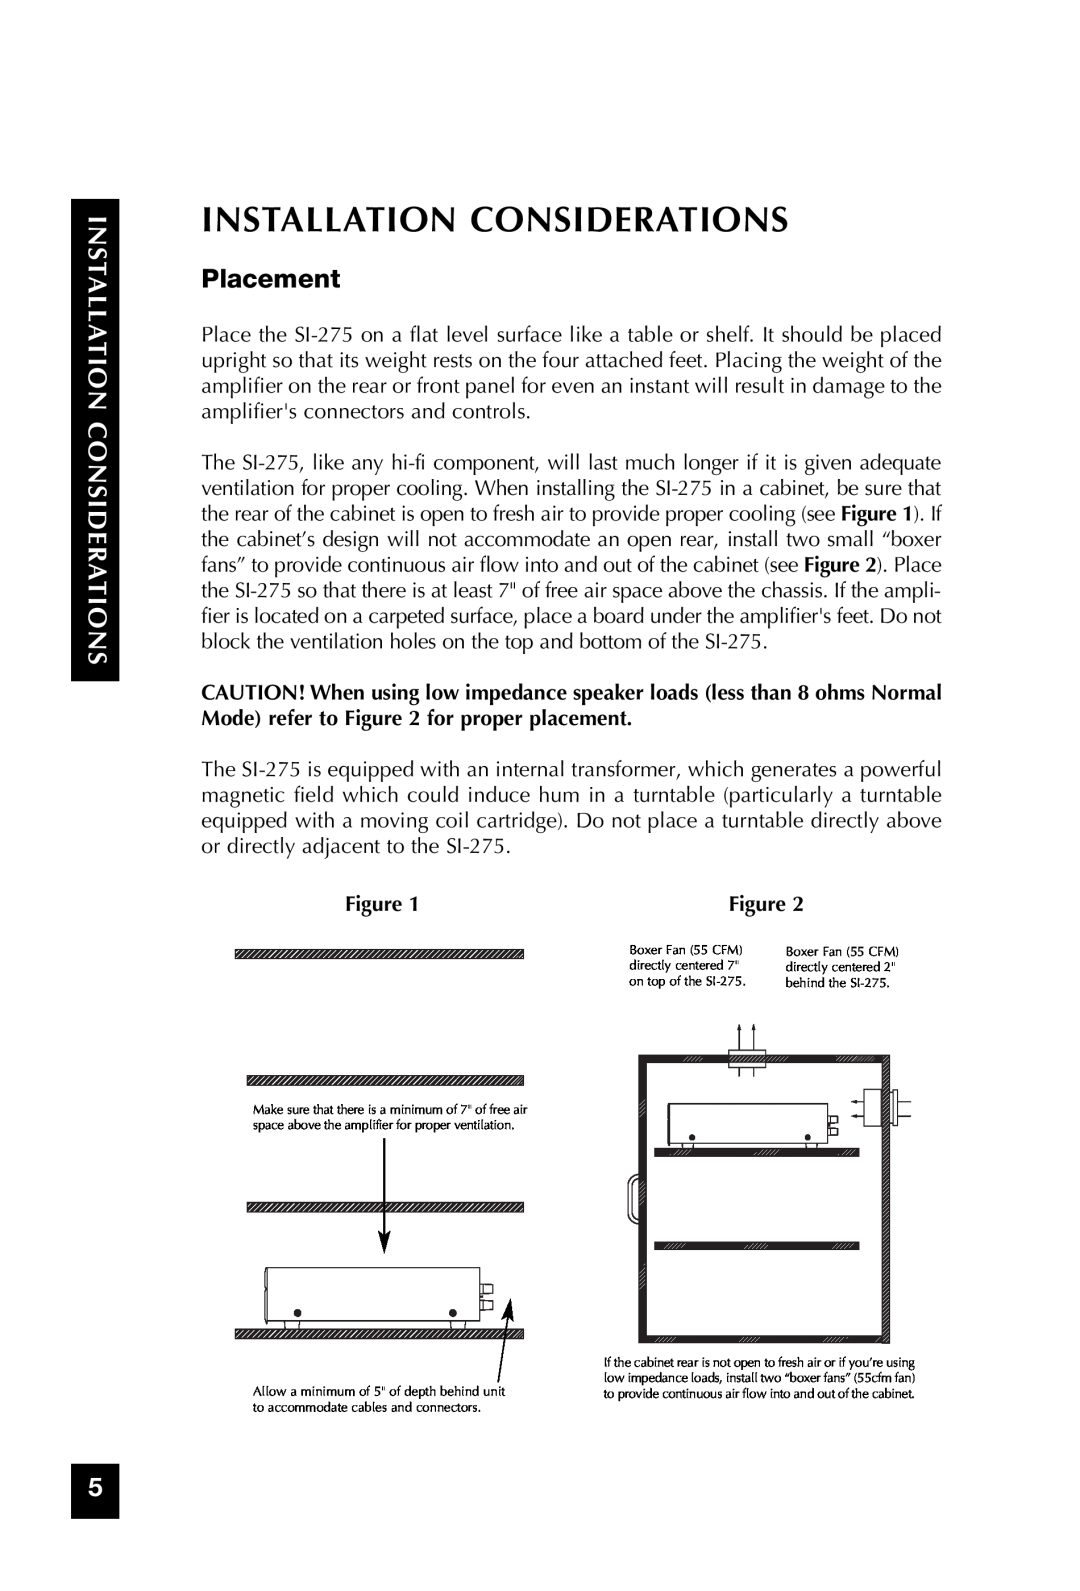 Niles Audio SI-275 manual Installation Considerations, Placement 